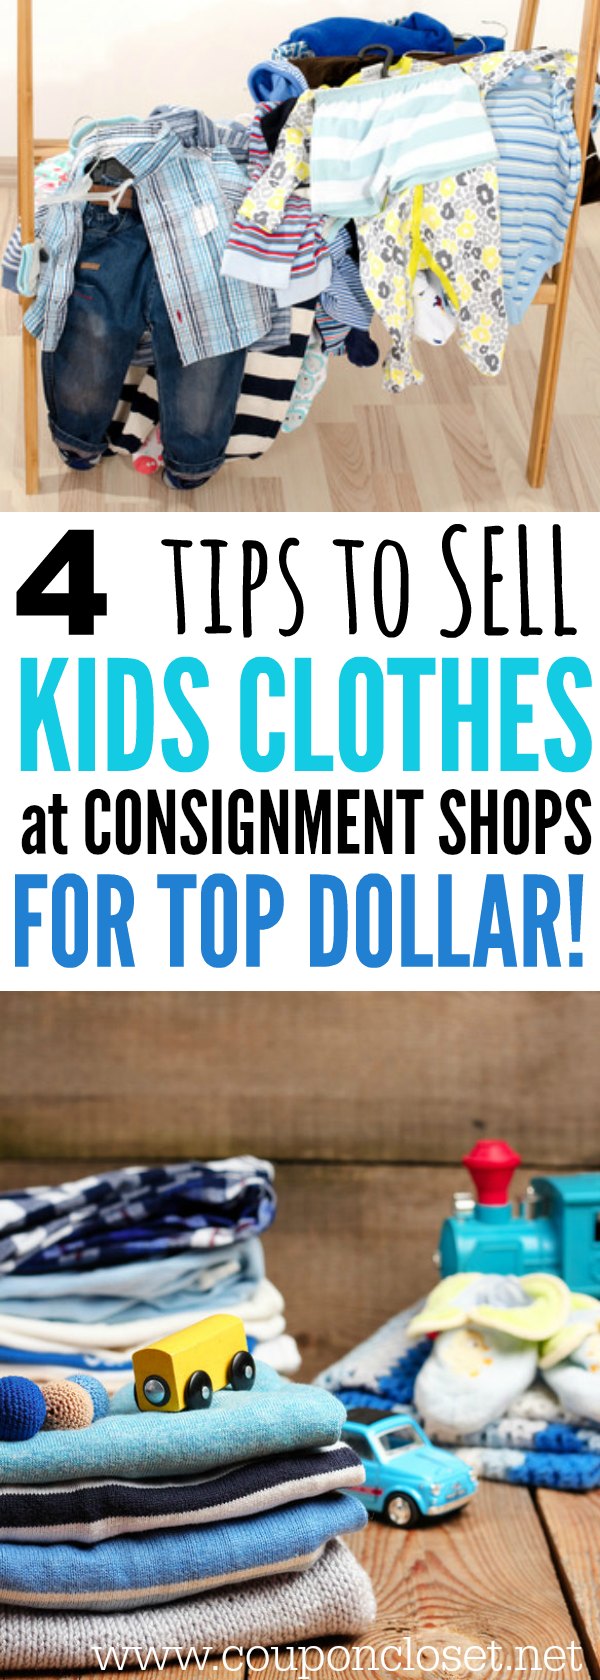 Sell Kids Clothes at Children's Consignment Shops for Top Dollar!